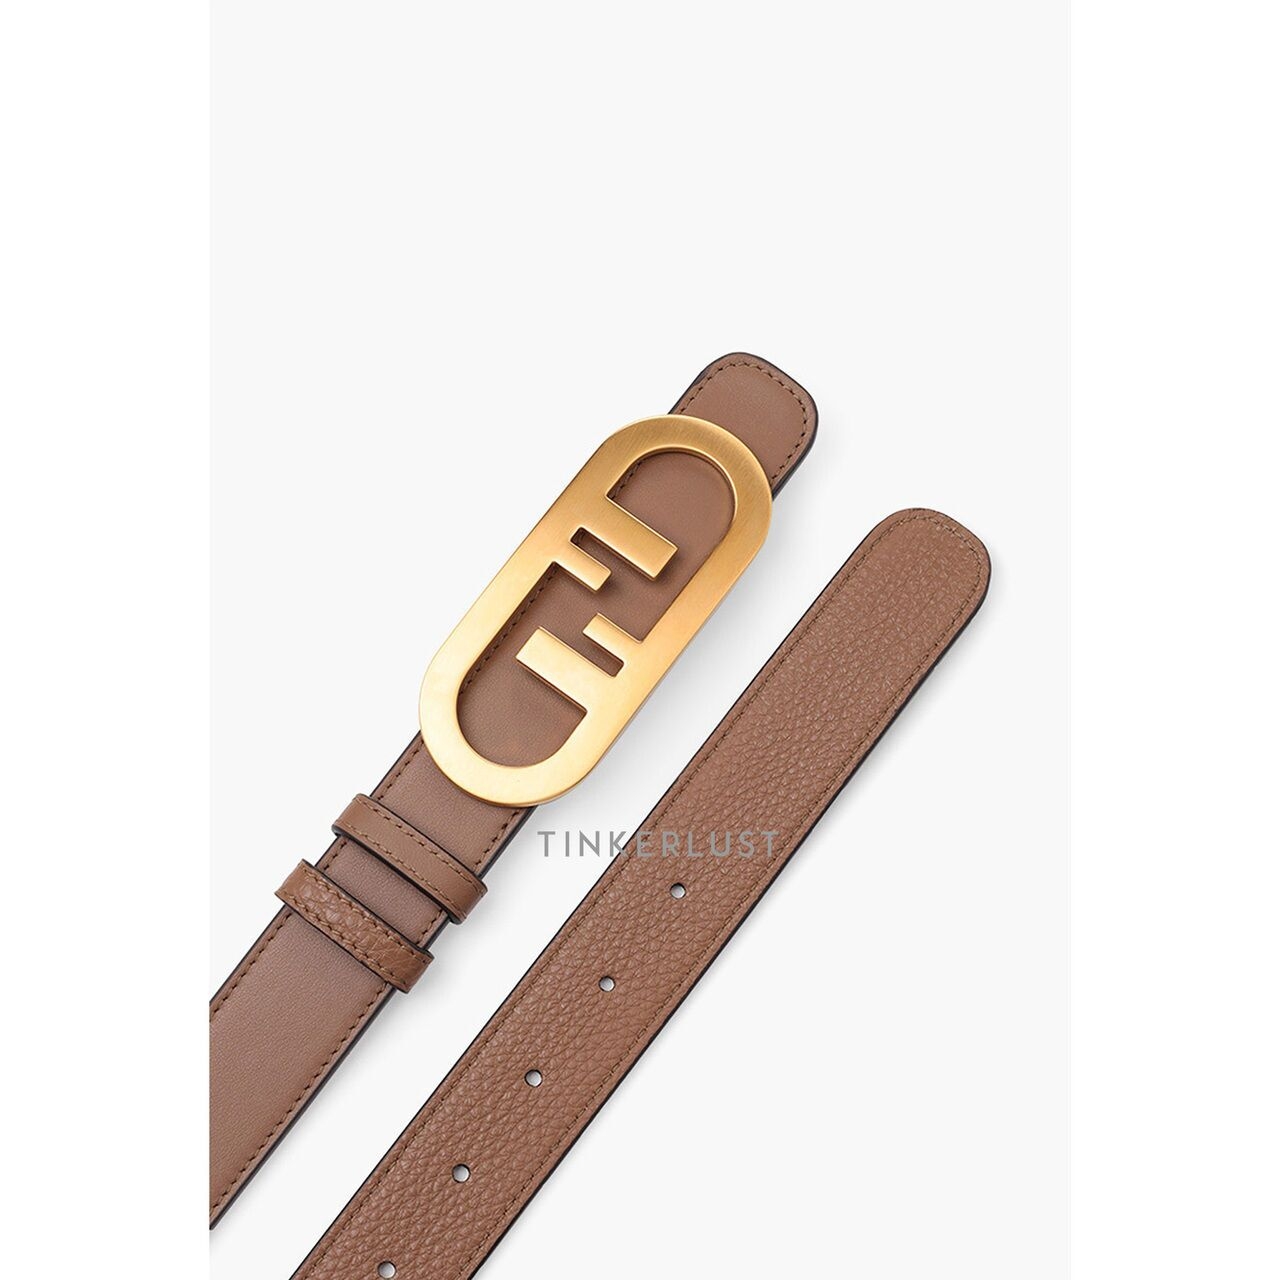 Fendi Reversible Belt 3cm in Cuoio Leather with O'Lock Buckle